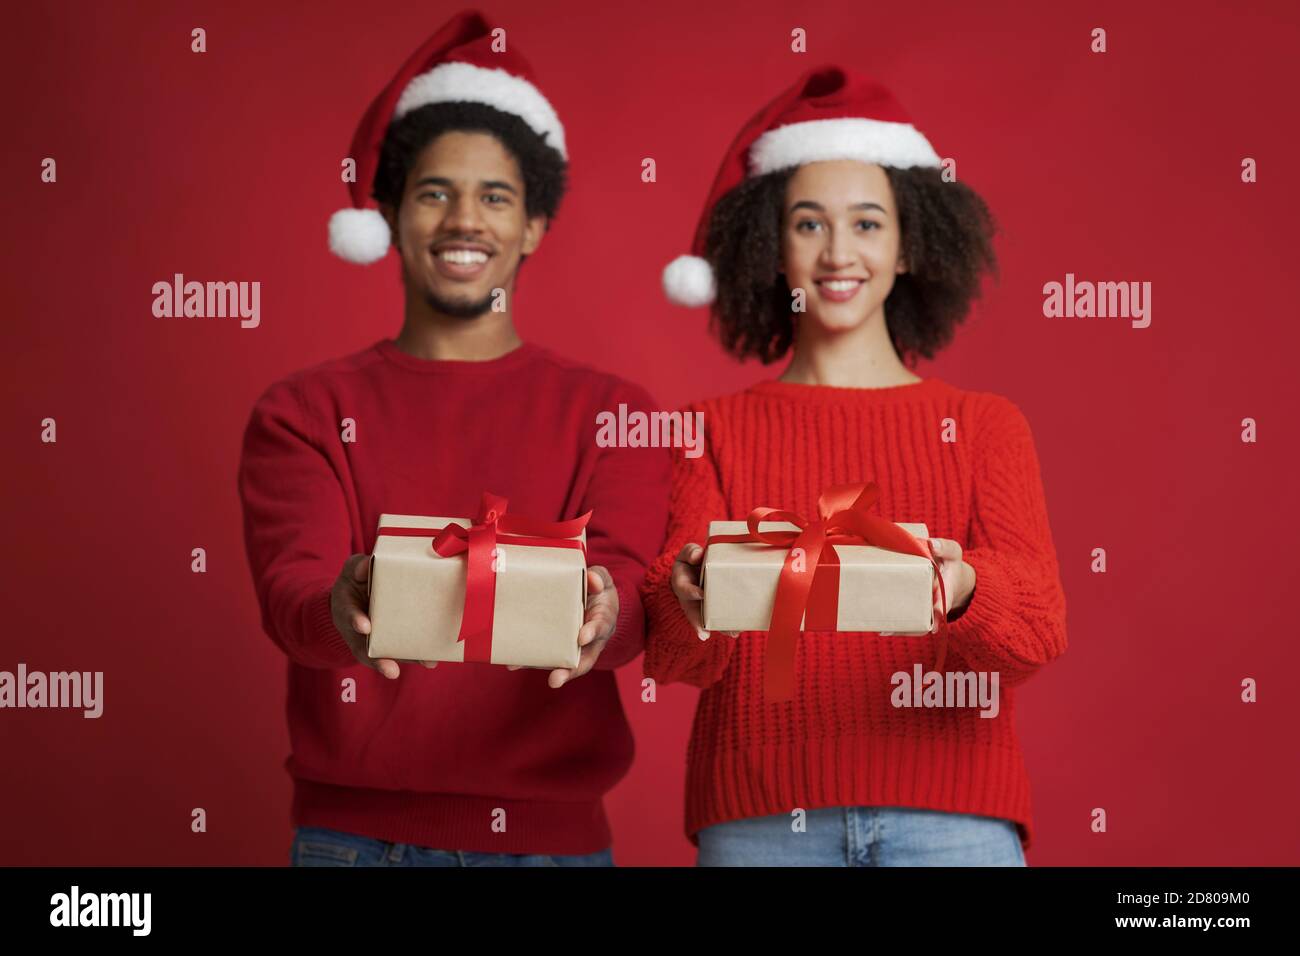 New Year and Christmas gift for family Stock Photo